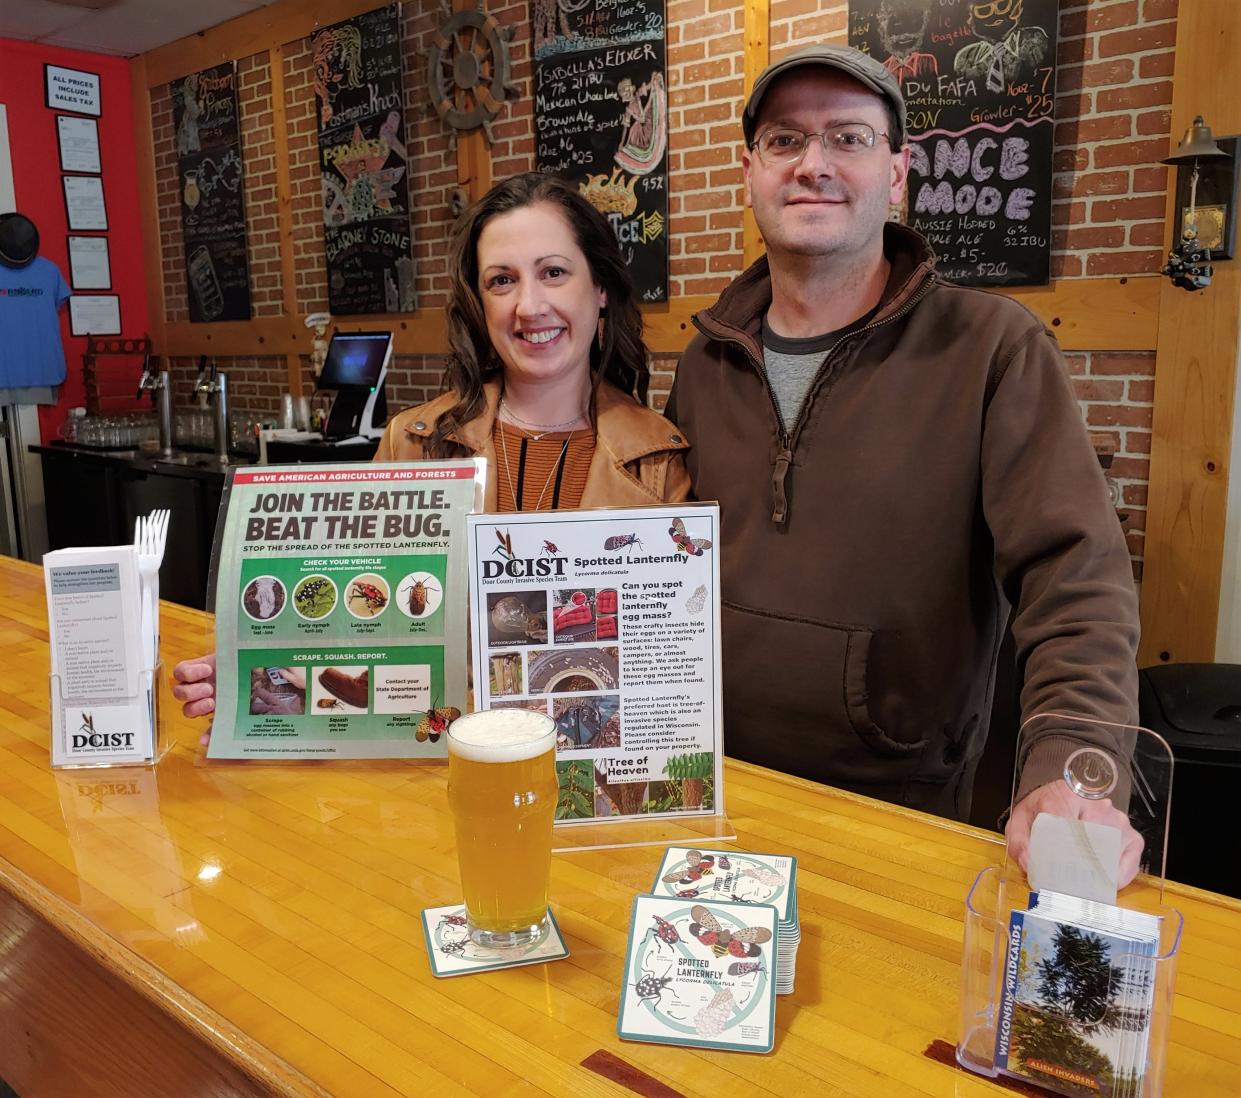 Amanda and Patrick Surfus of Starboard Brewing Co. in Sturgeon Bay are tapping a specially brewed Planthopper Pale Ale as part of an outreach program with the Door County Invasive Species Team to educate people about destructive invasives that are in Wisconsin or close by. The effort includes not just a special beer but also materials that give information on the featured species, including coasters, and ideas to prevent the spread of invasives.